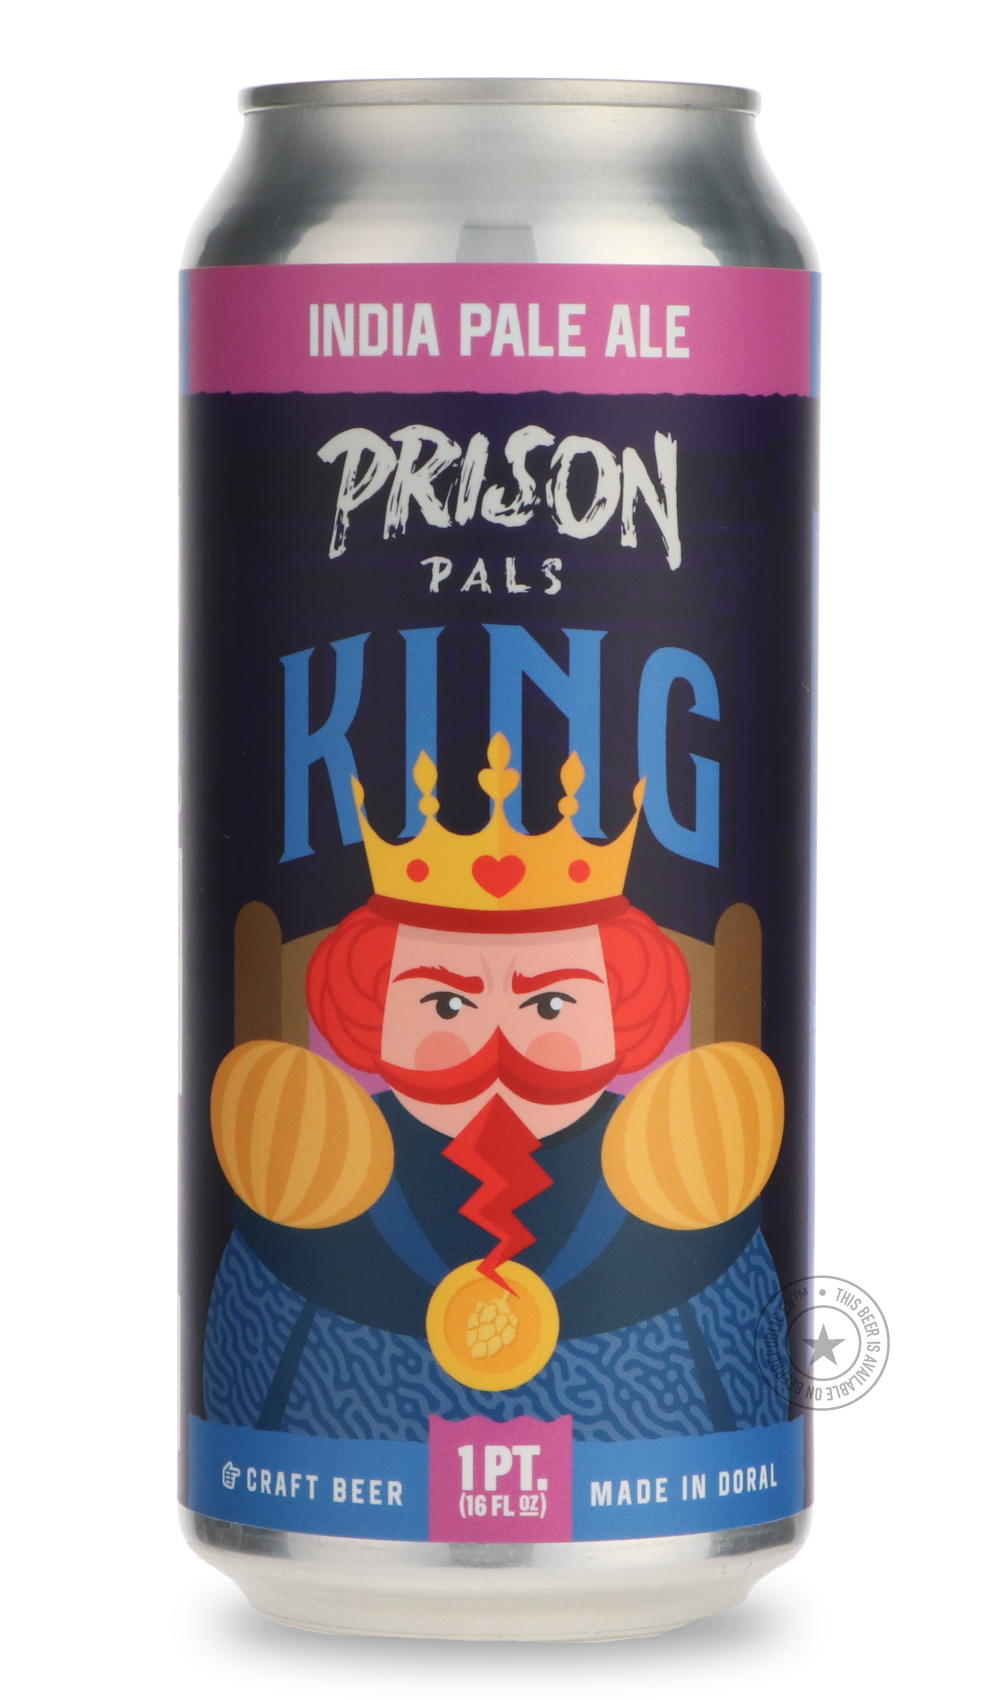 -Prison Pals- King-IPA- Only @ Beer Republic - The best online beer store for American & Canadian craft beer - Buy beer online from the USA and Canada - Bier online kopen - Amerikaans bier kopen - Craft beer store - Craft beer kopen - Amerikanisch bier kaufen - Bier online kaufen - Acheter biere online - IPA - Stout - Porter - New England IPA - Hazy IPA - Imperial Stout - Barrel Aged - Barrel Aged Imperial Stout - Brown - Dark beer - Blond - Blonde - Pilsner - Lager - Wheat - Weizen - Amber - Barley Wine - 